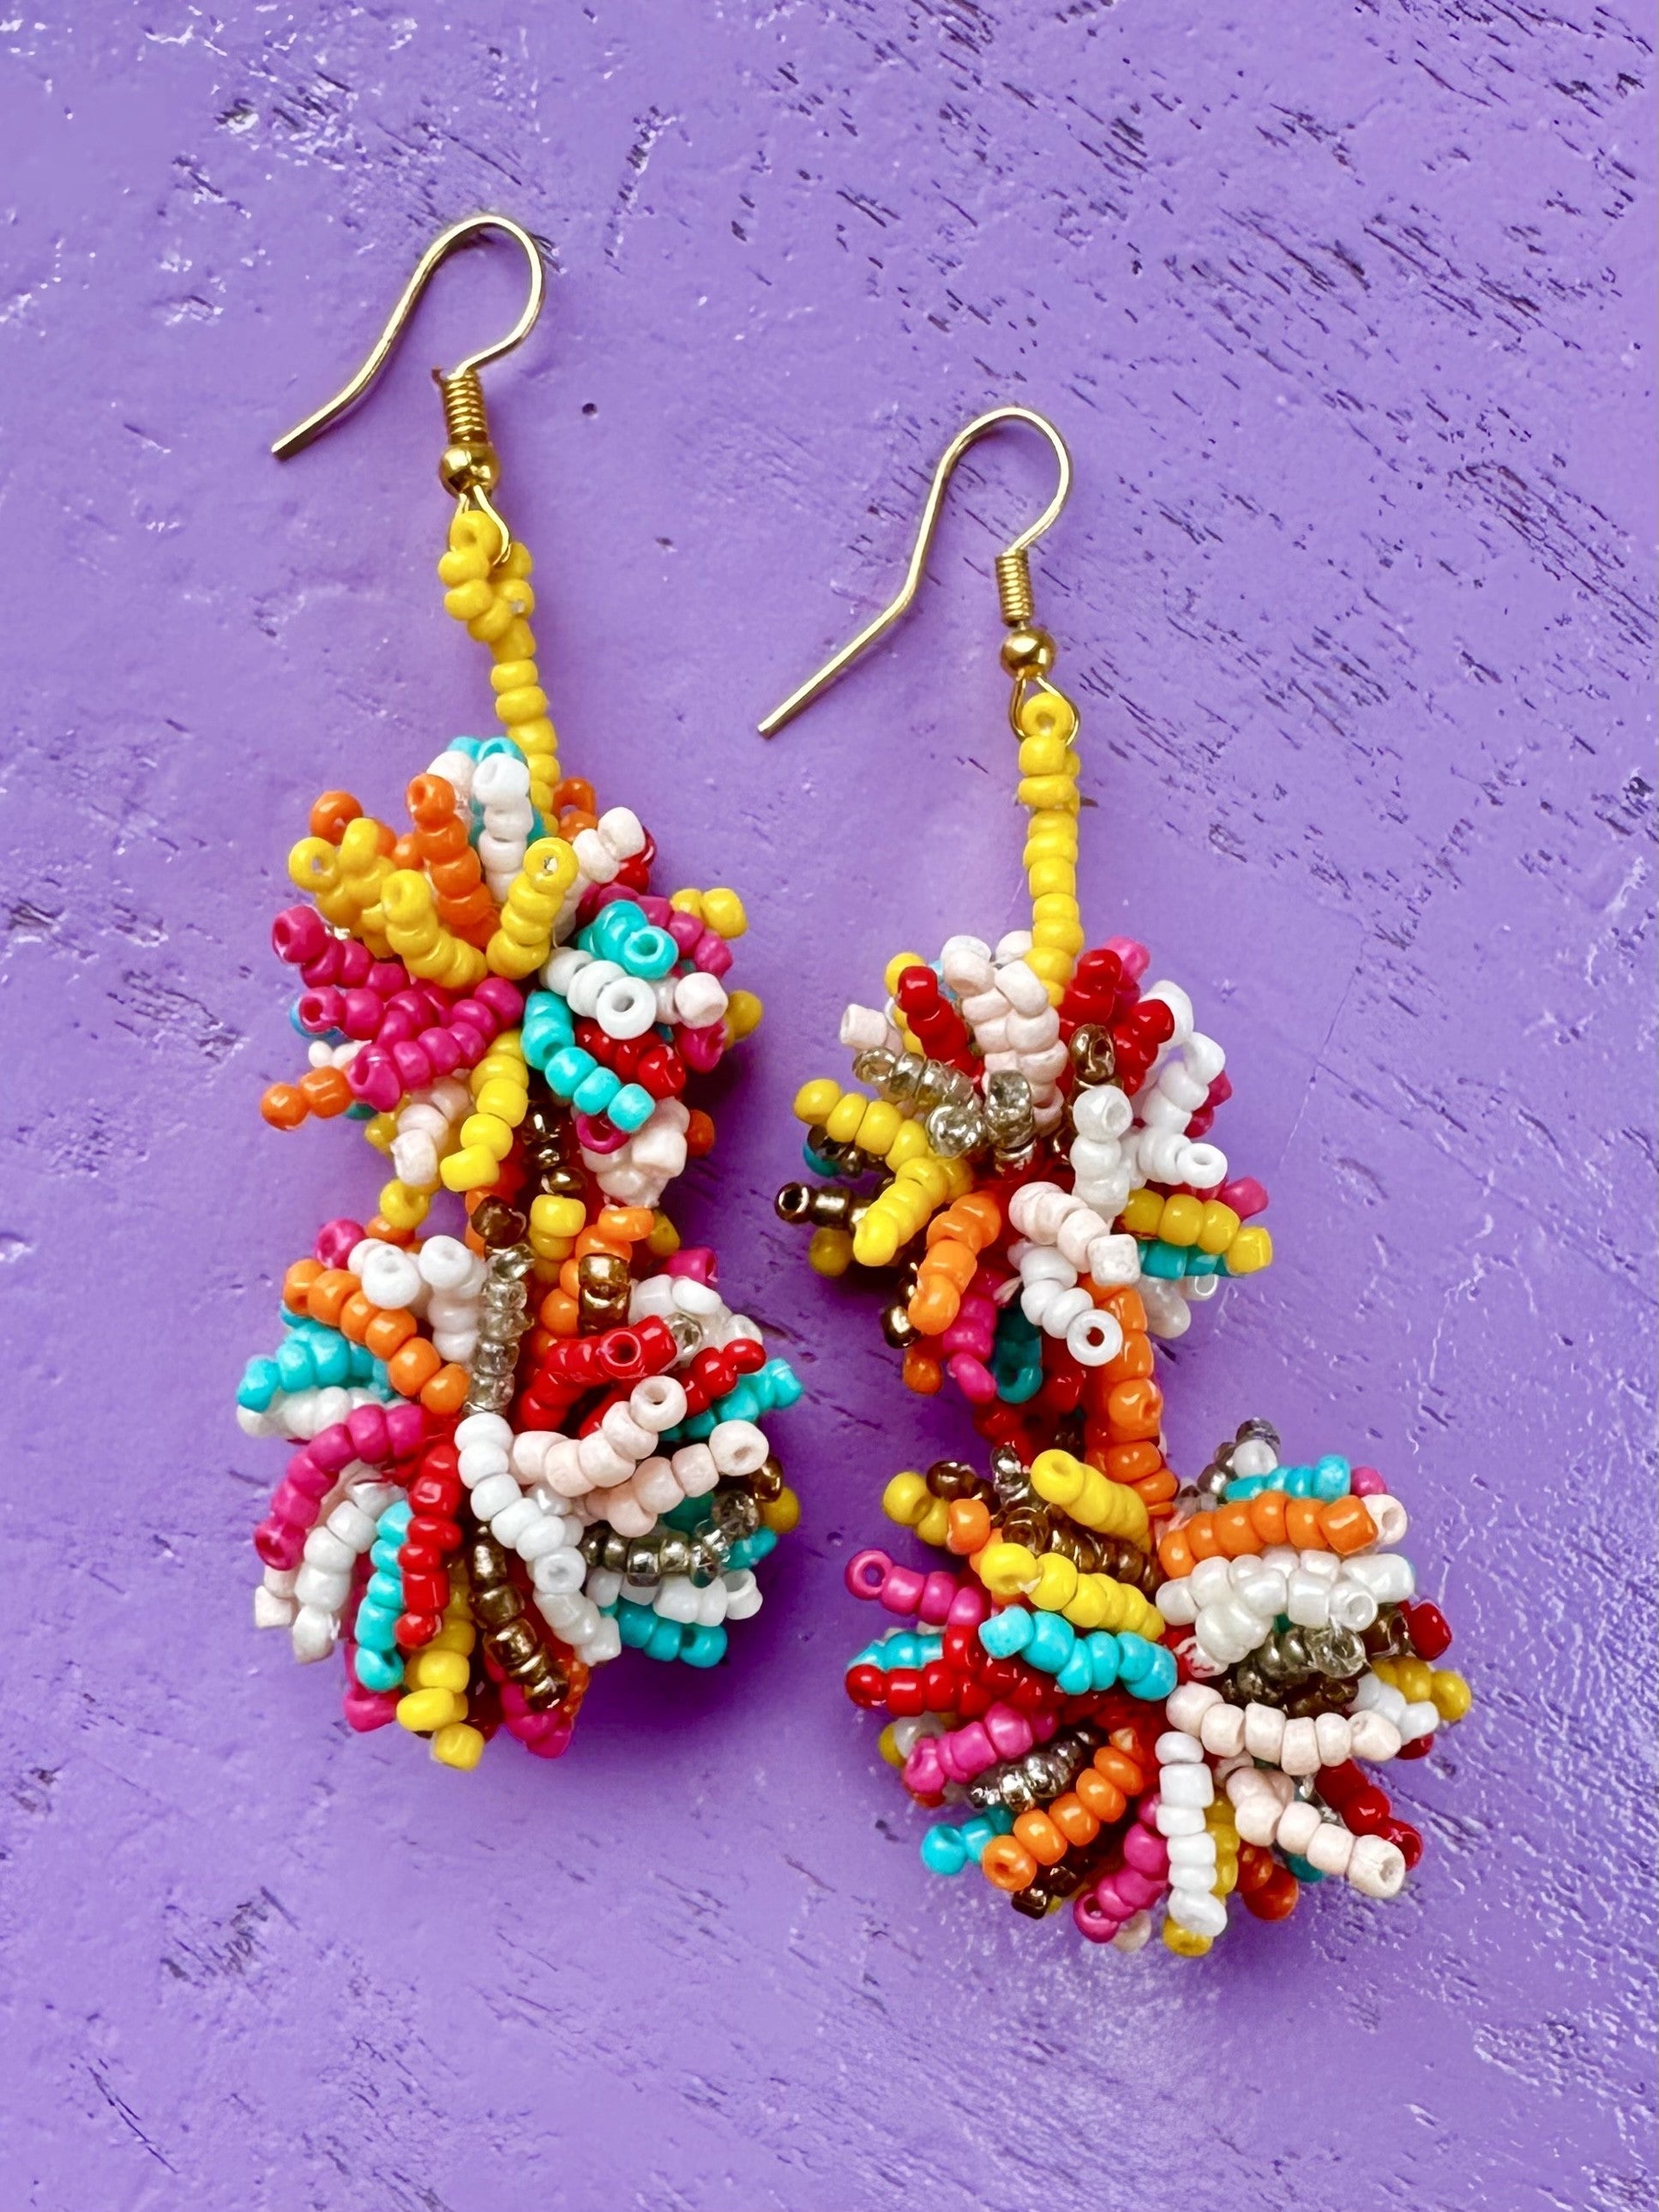 Call It Love Earrings-Earrings-Golden Stella-The Village Shoppe, Women’s Fashion Boutique, Shop Online and In Store - Located in Muscle Shoals, AL.